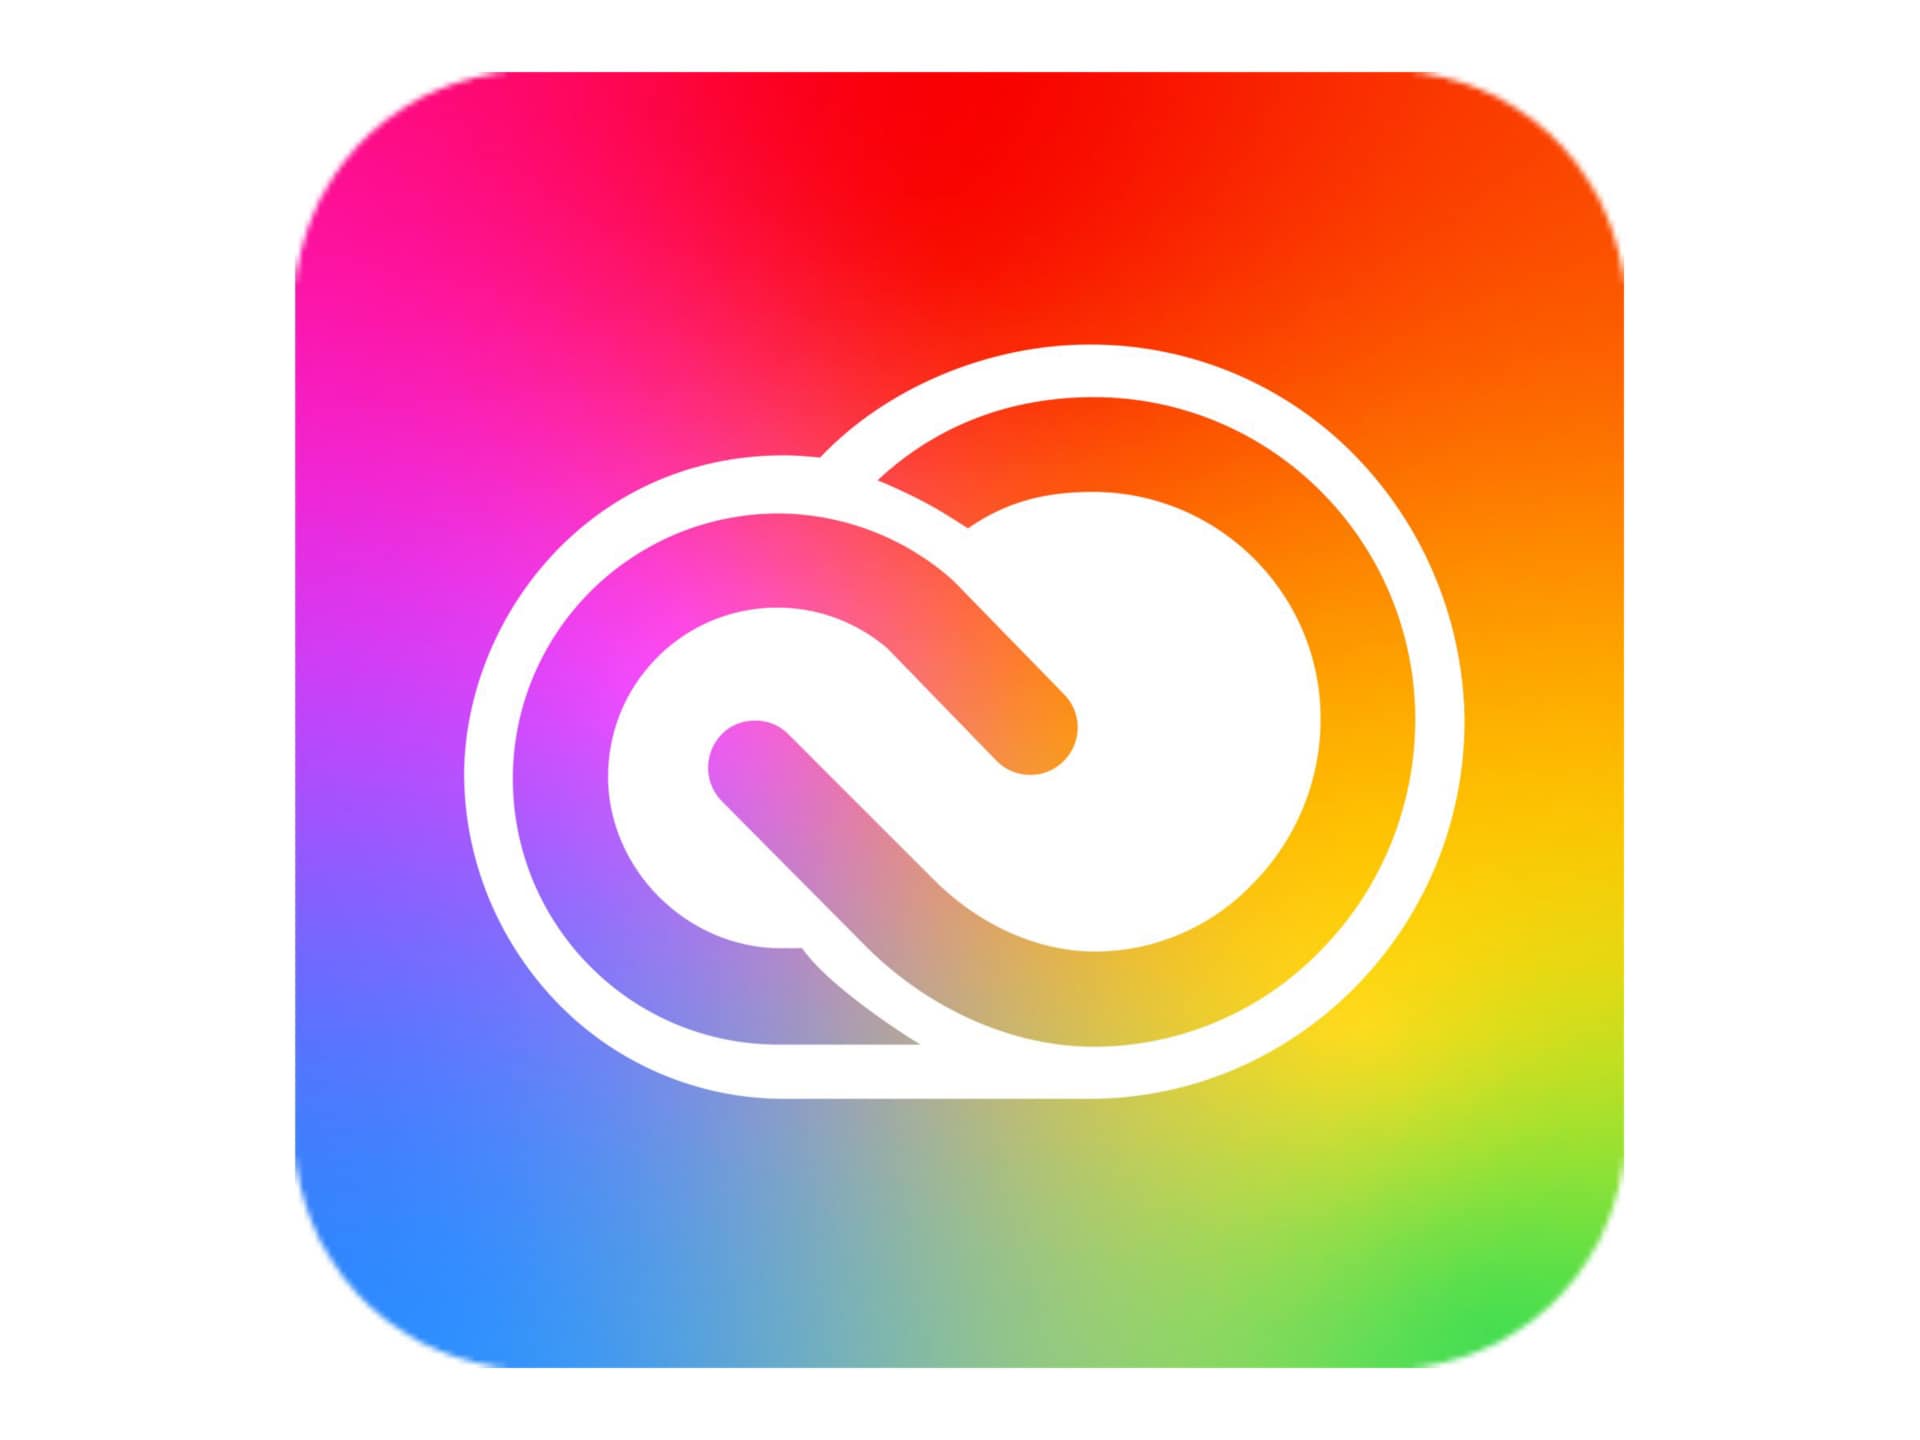 Adobe Creative Cloud for Enterprise - All Apps - Subscription New (30 months) - 1 named user